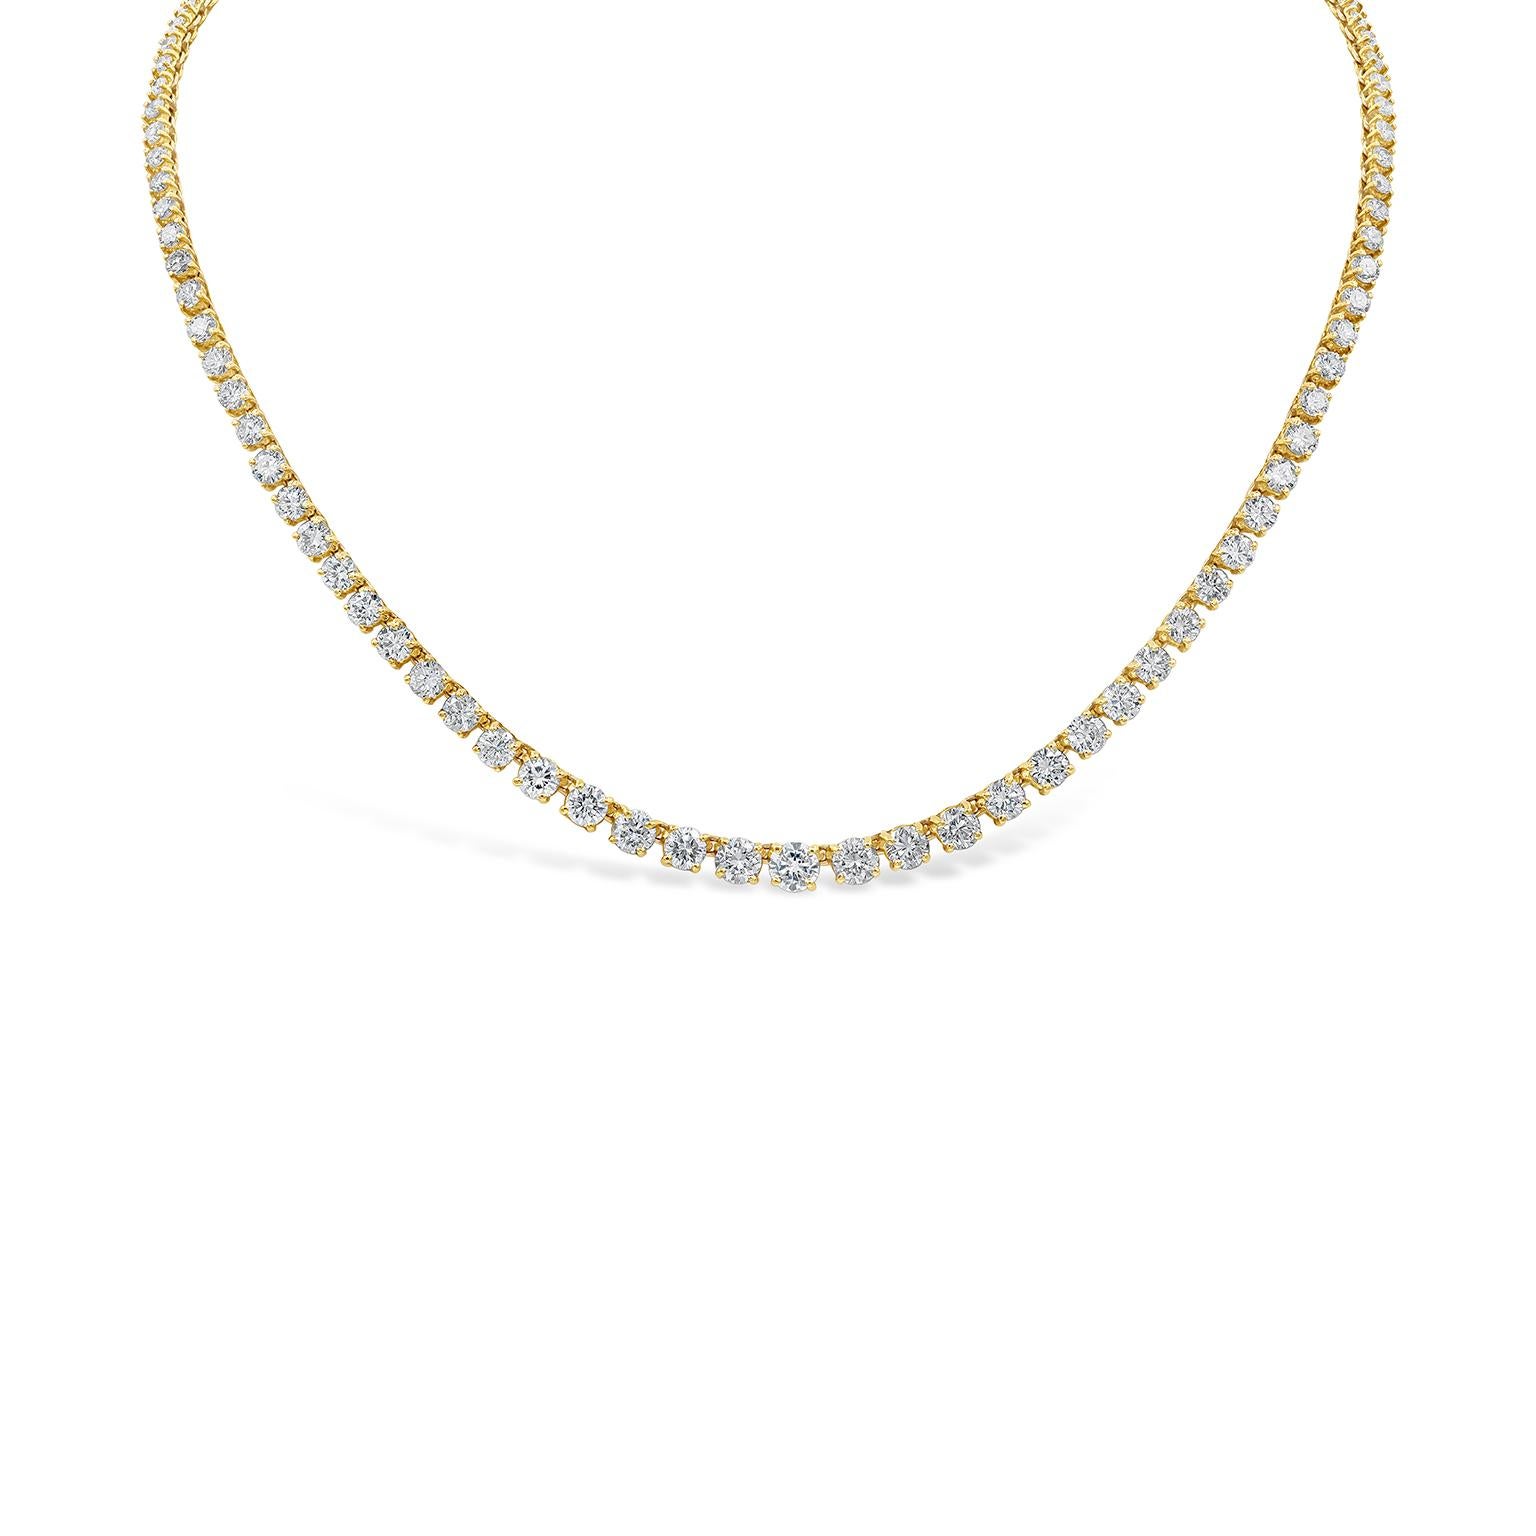 A chic and brilliant design showcasing round brilliant diamonds that graduate larger as it gets to the center. Diamonds weigh 10.04 carats total. Set in a seamless 18 karat yellow gold design for maximum brilliance.

Style available in different